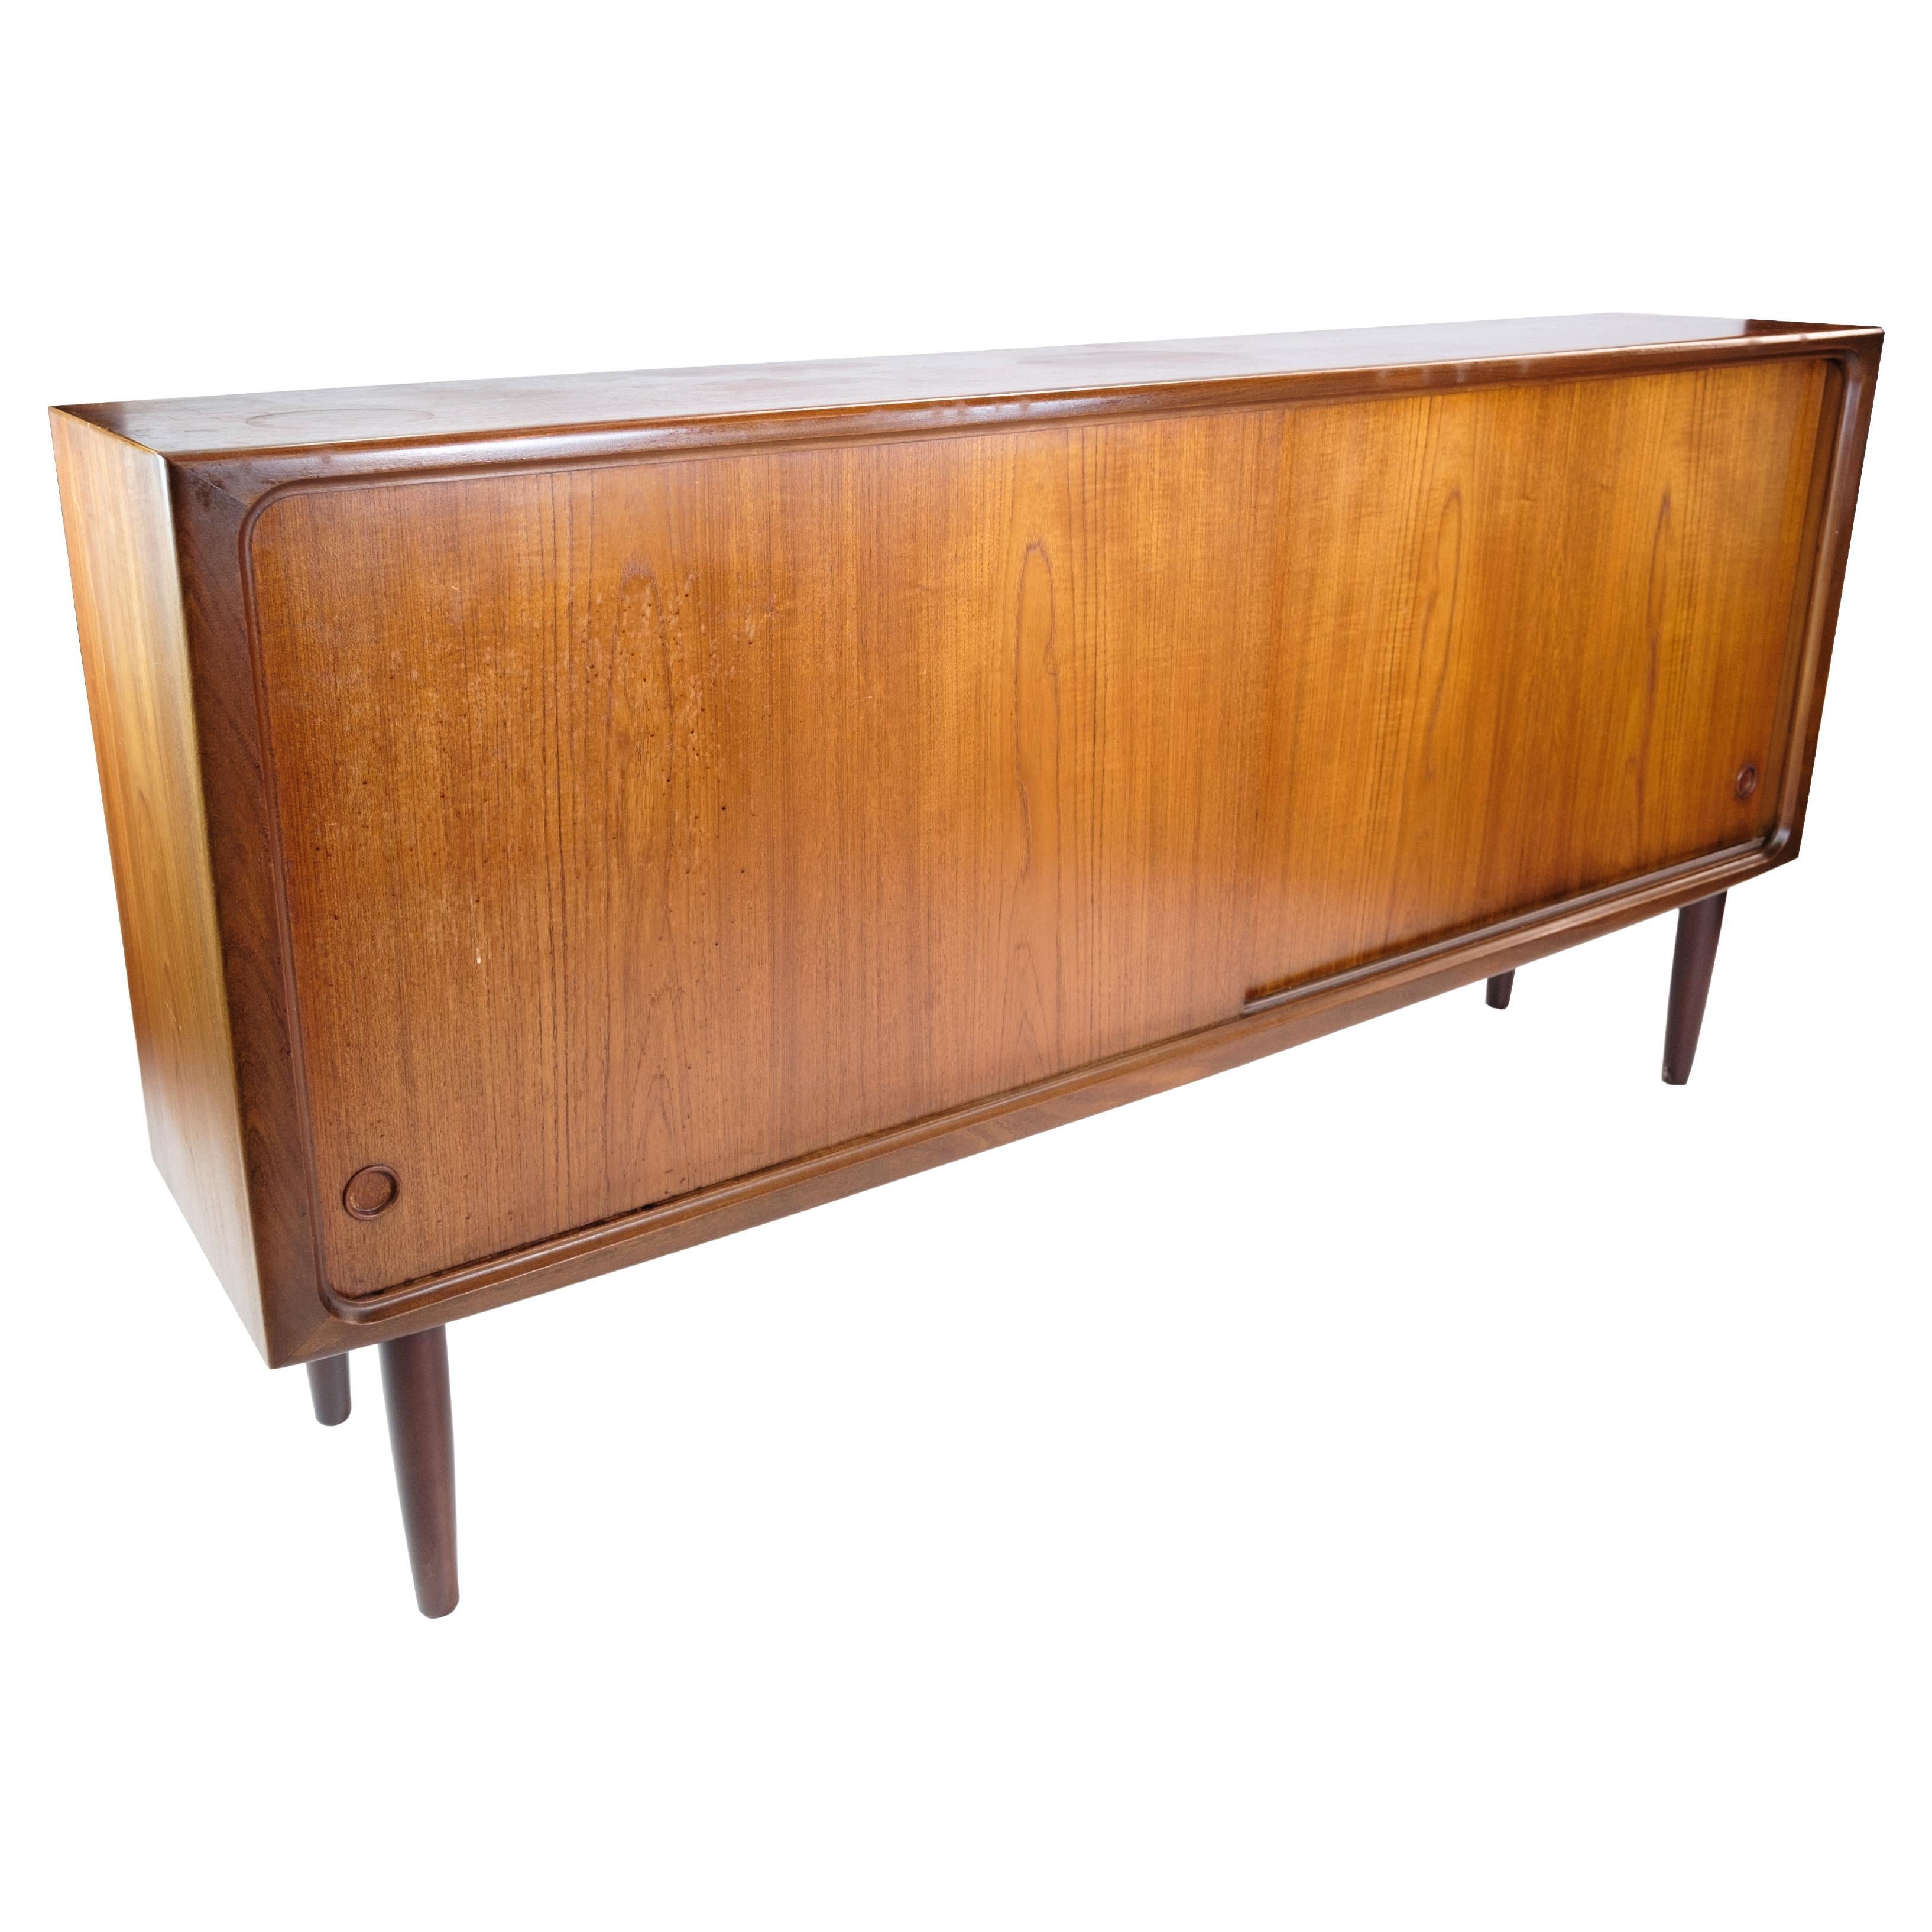 Small sideboard in teak wood of Danish design from around the 1960s. The sideboard has 2 sliding doors with internal glass and shelves.

This product will be inspected thoroughly at our professional workshop by our educated employees, who assure